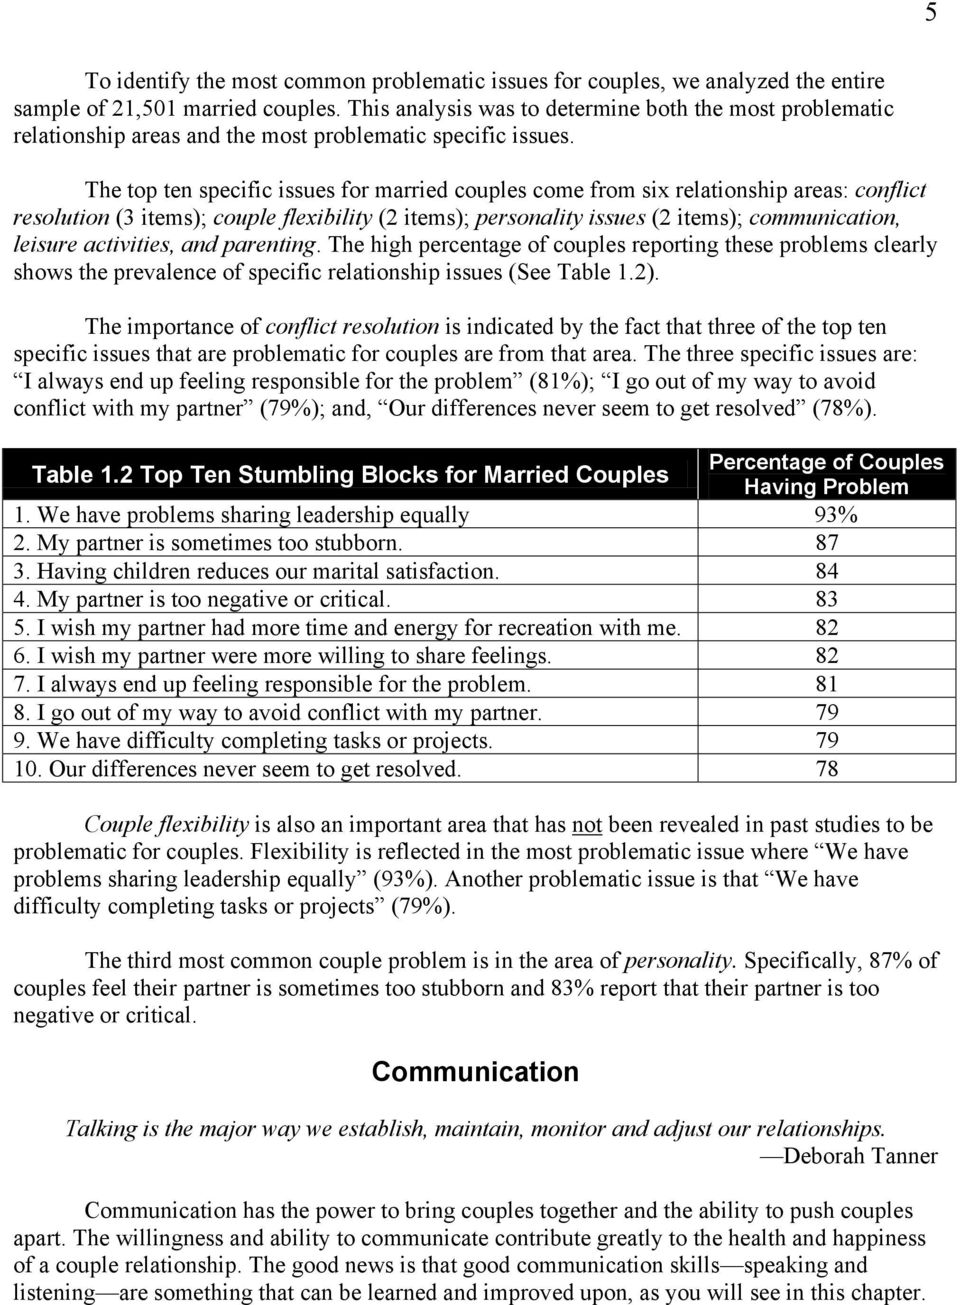 The top ten specific issues for married couples come from six relationship areas: conflict resolution (3 items); couple flexibility (2 items); personality issues (2 items); communication, leisure